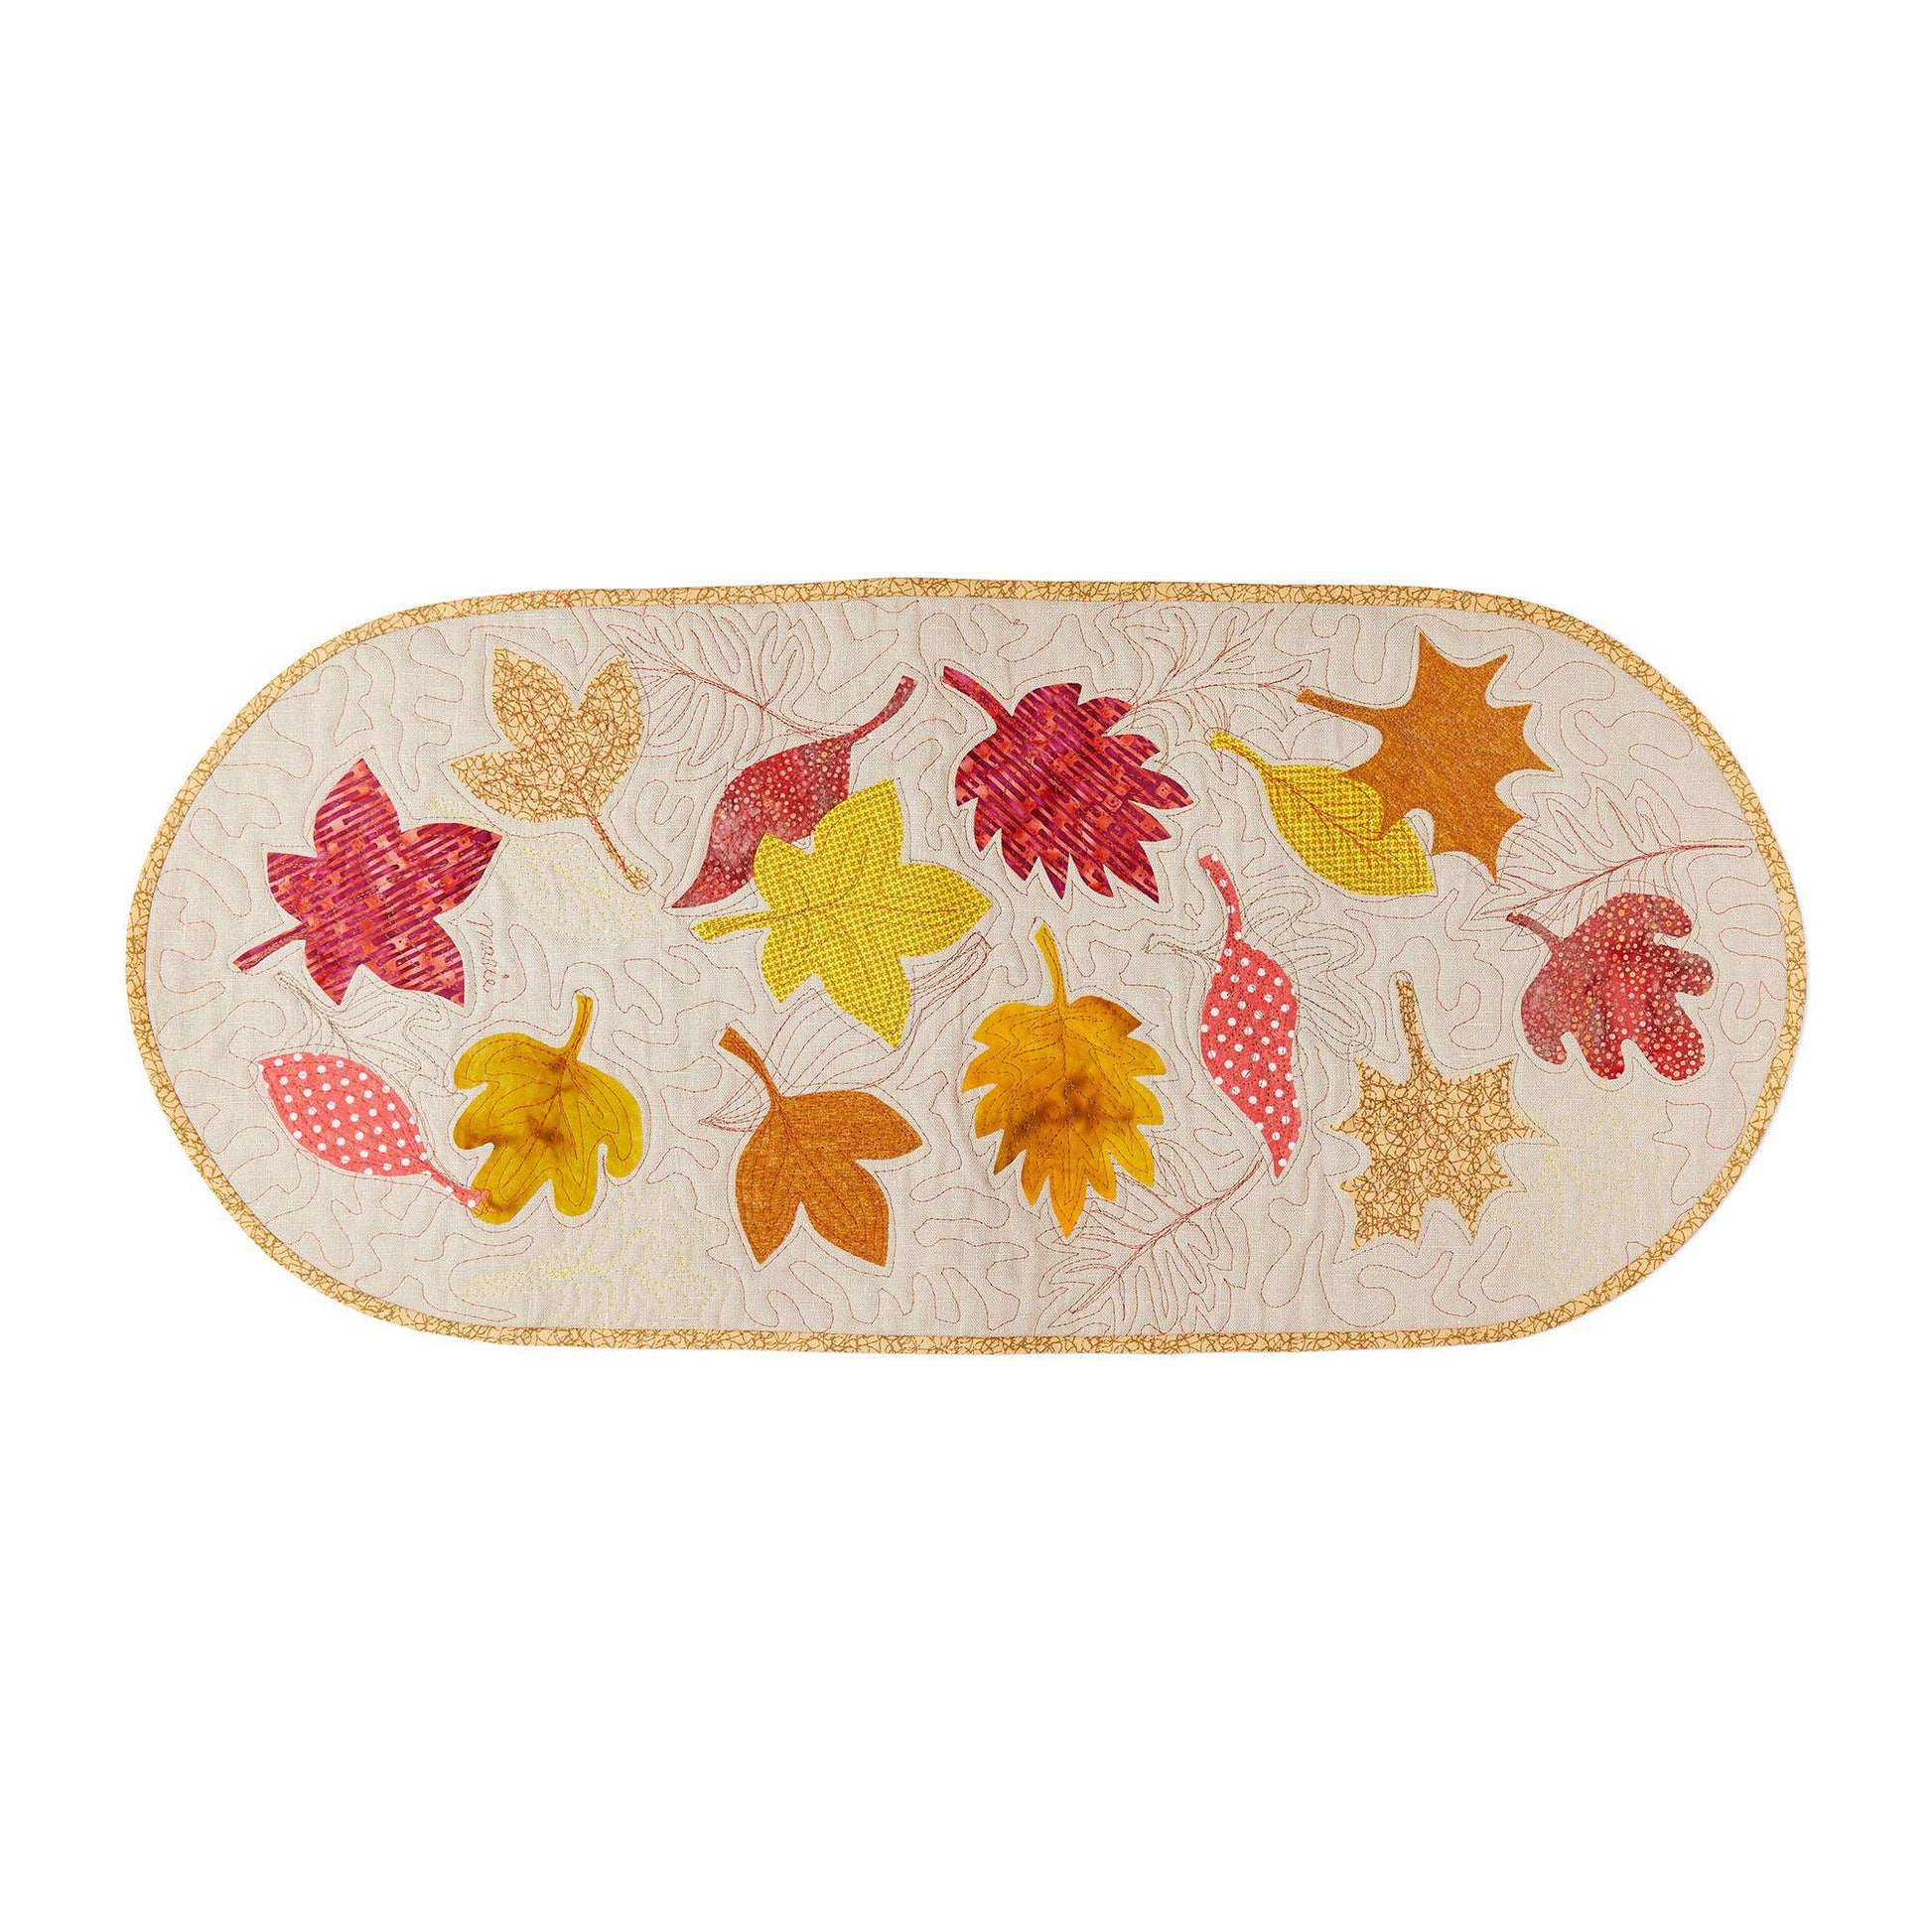 Free Coats & Clark Autumn Leaf Table Runner Sewing Pattern